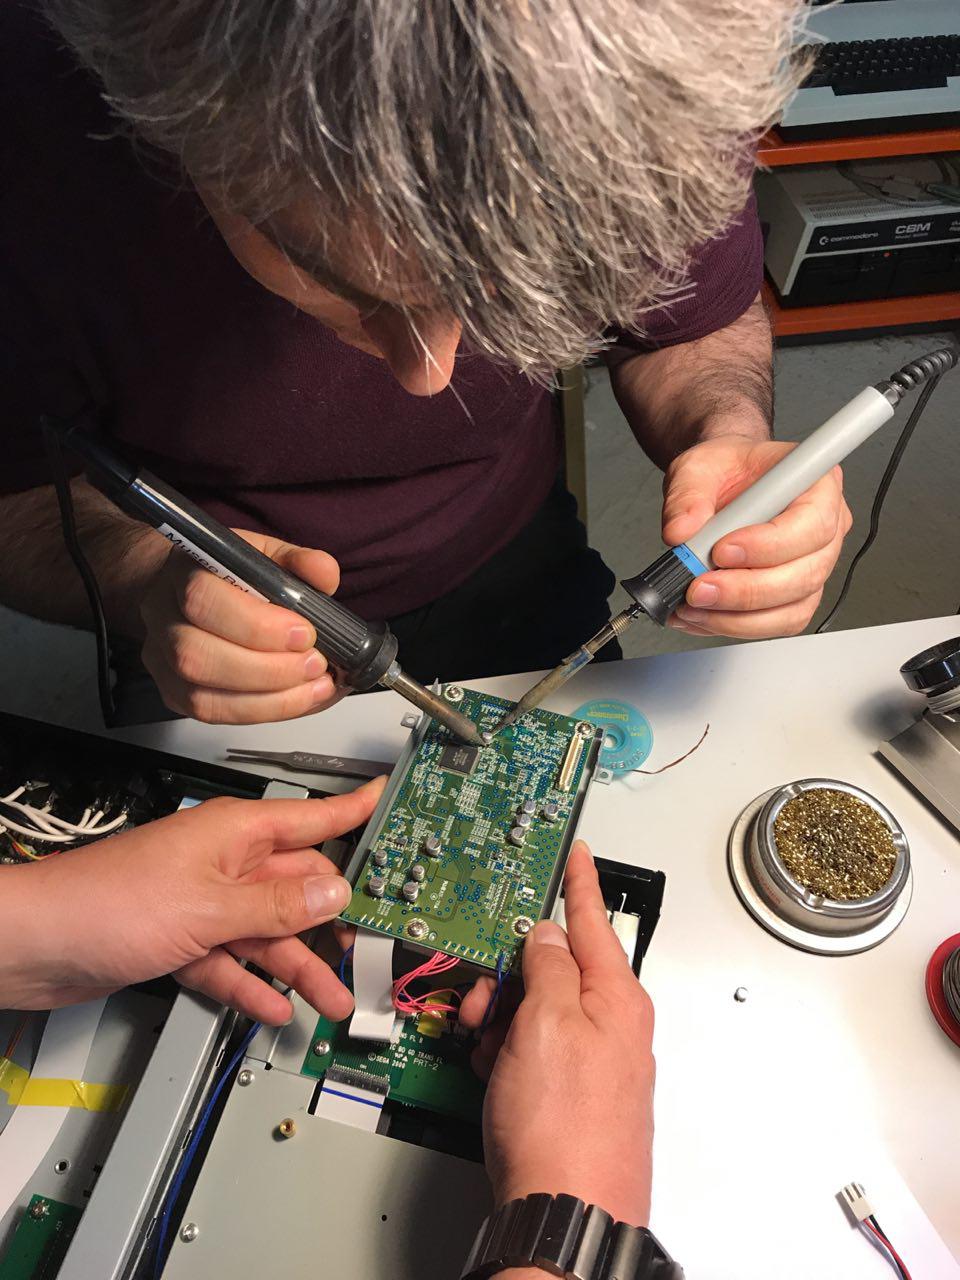 Musée Bolo’s volunteers replacing the faulty capacitor